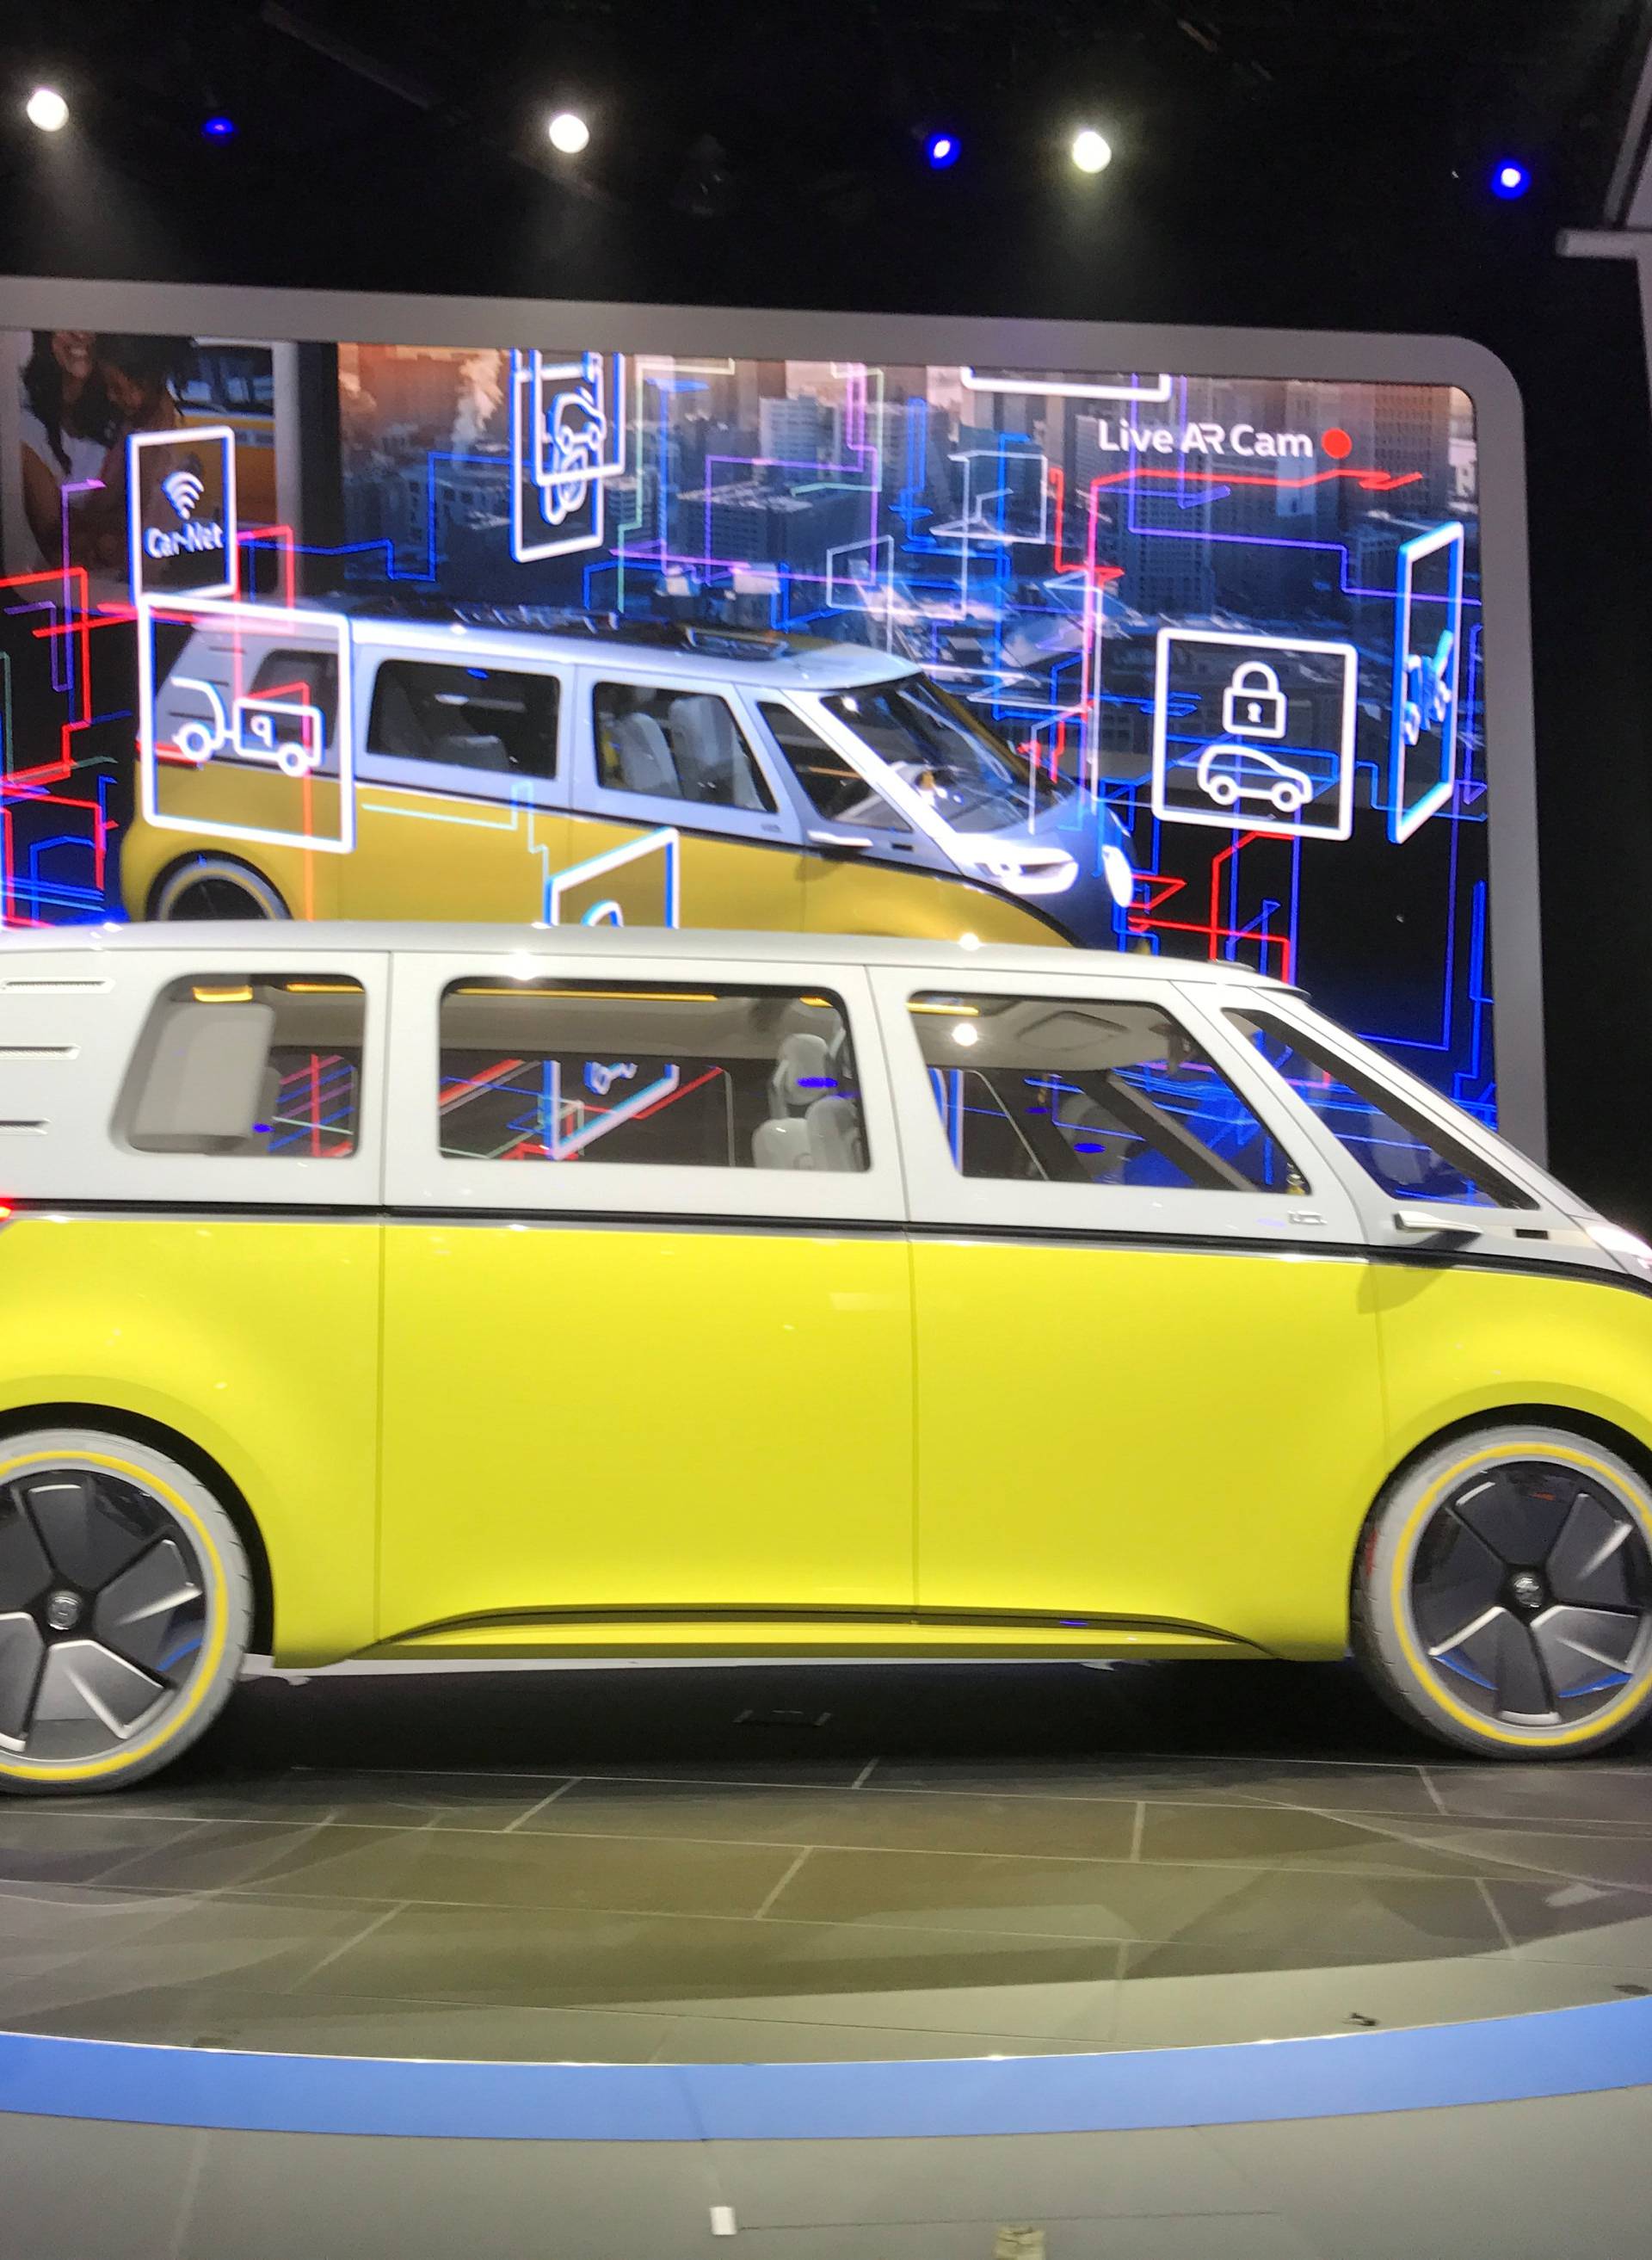 Volkswagen presents a new concept for an electric minibus "I.D.Buzz" at the North American International Auto Show in Detroit